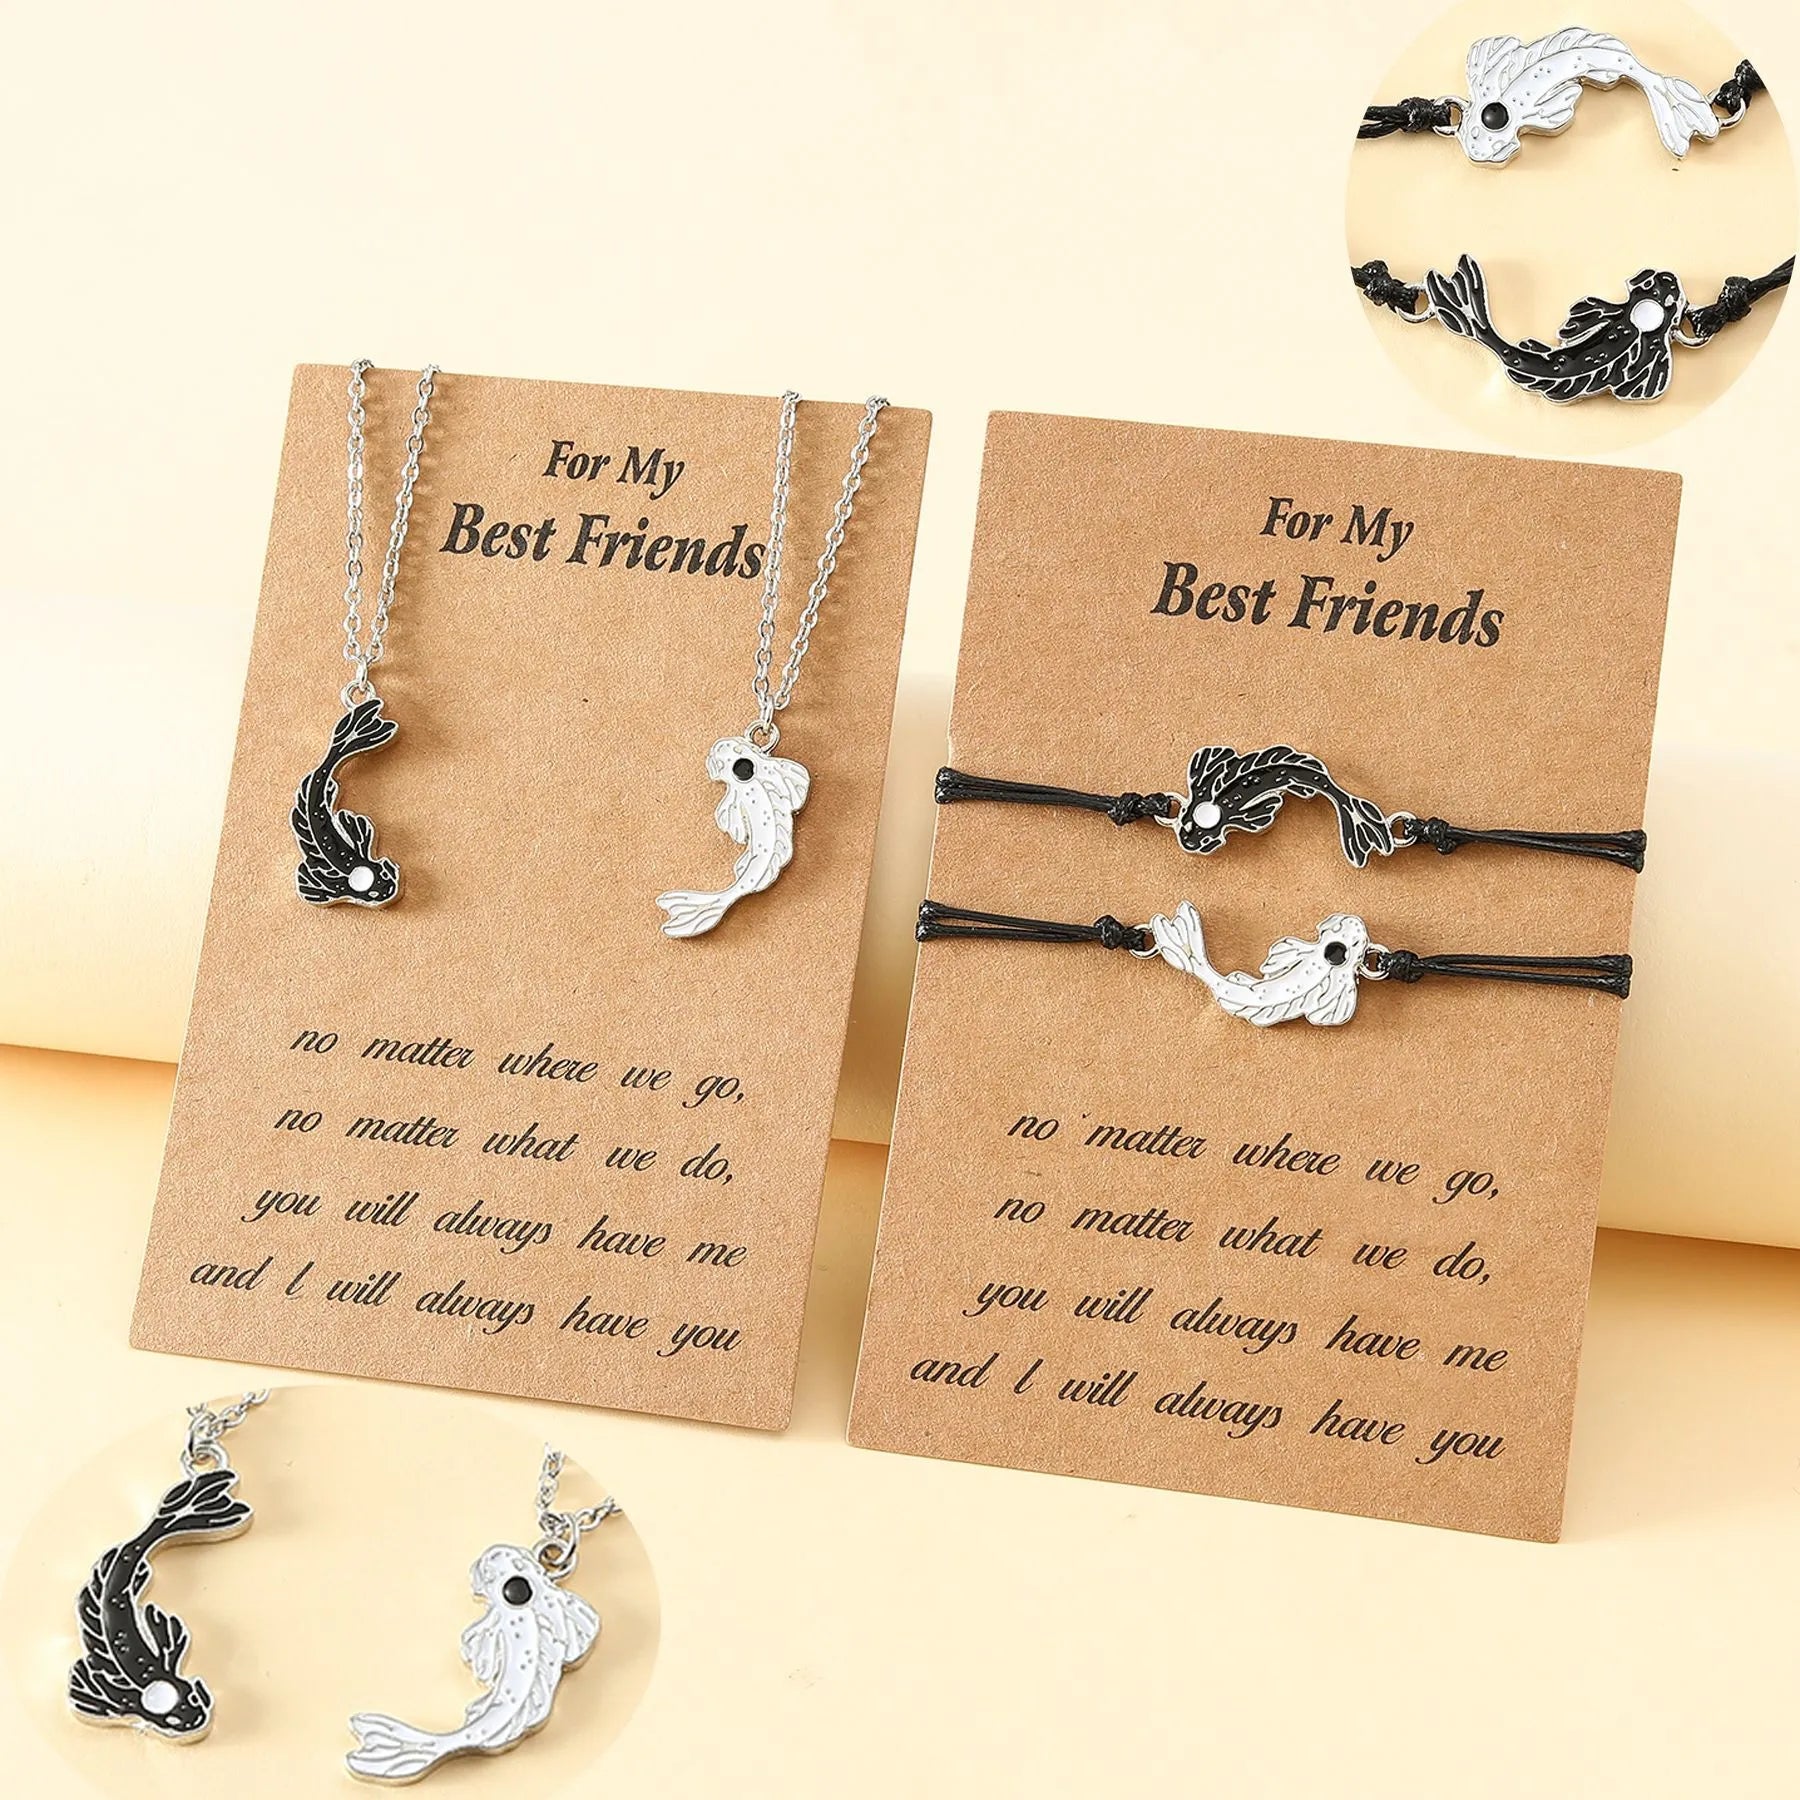 Alloy Tai Chi Fish Bracelet/Necklace with 'Best Friends' Gift Card